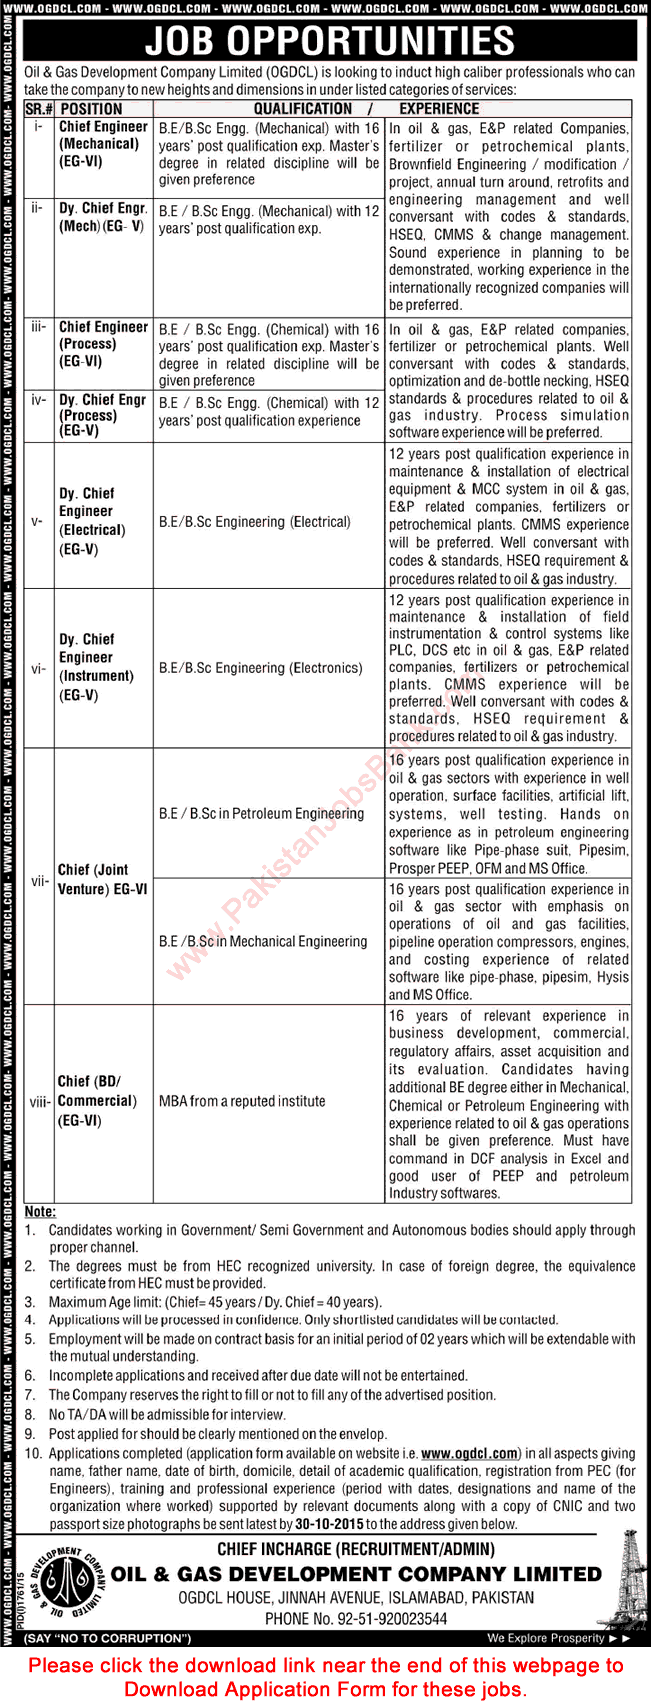 OGDCL Jobs October 2015 Application Form Download for Engineers & Commercial Chief Latest